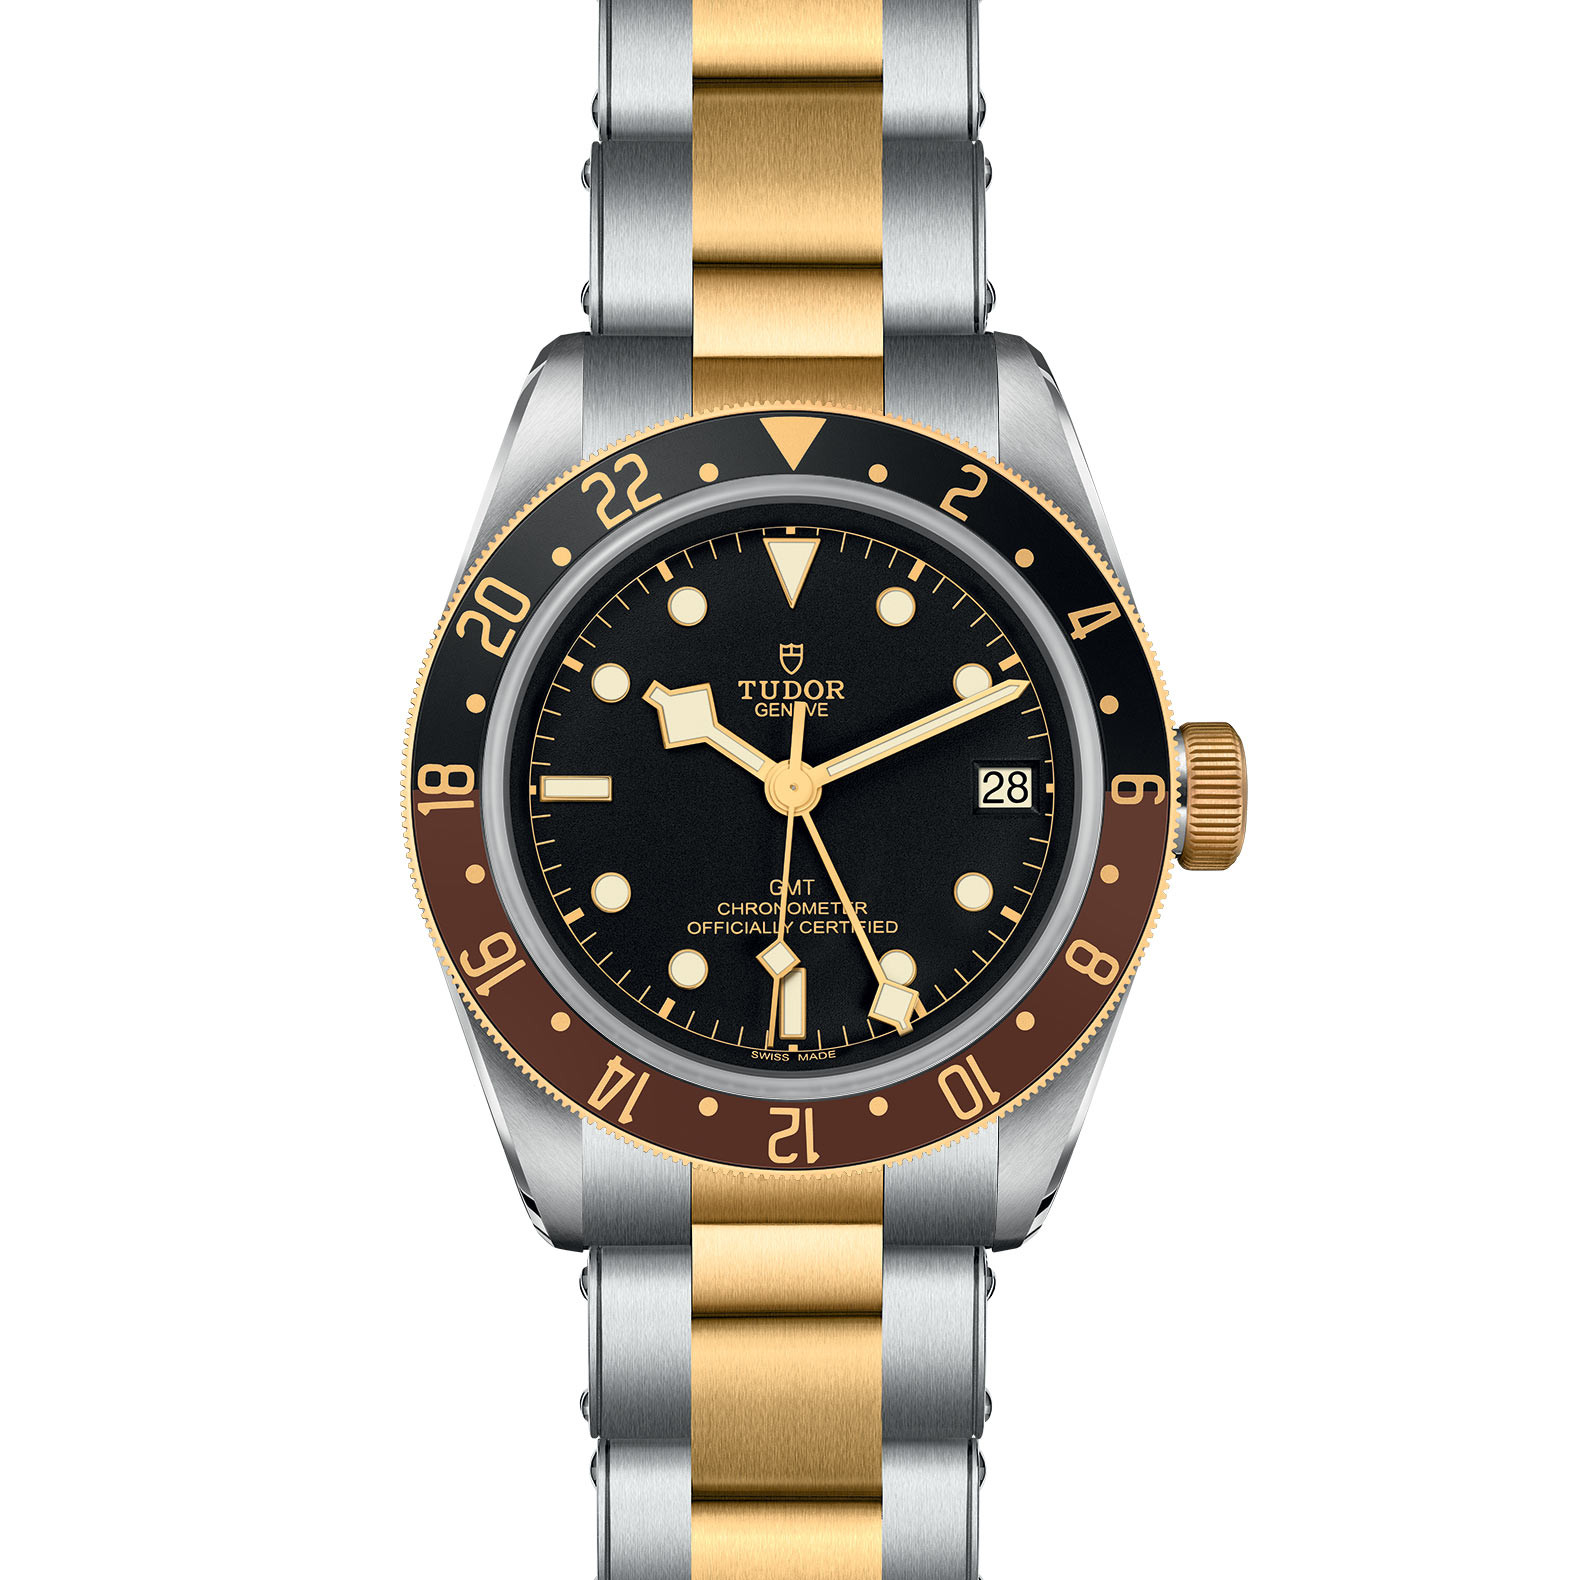 TUDOR Black Bay GMT S&G with Steel Case and Steel And Yellow Gold Bracelet - 41mm M79833MN-0001 Watch Front Facing